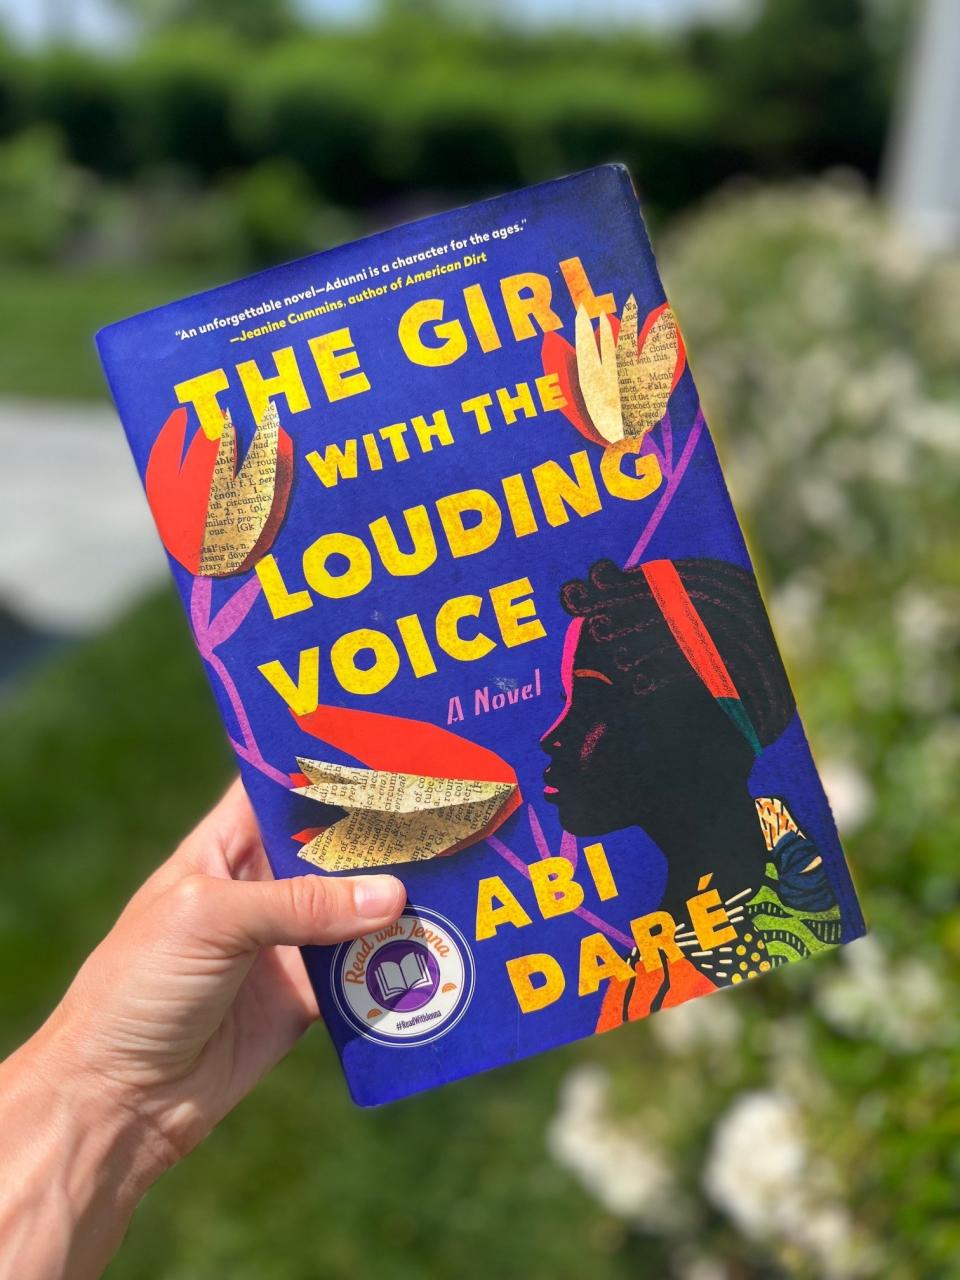 A hand holding "The Girl with the Louding Voice" by Abi Daré.